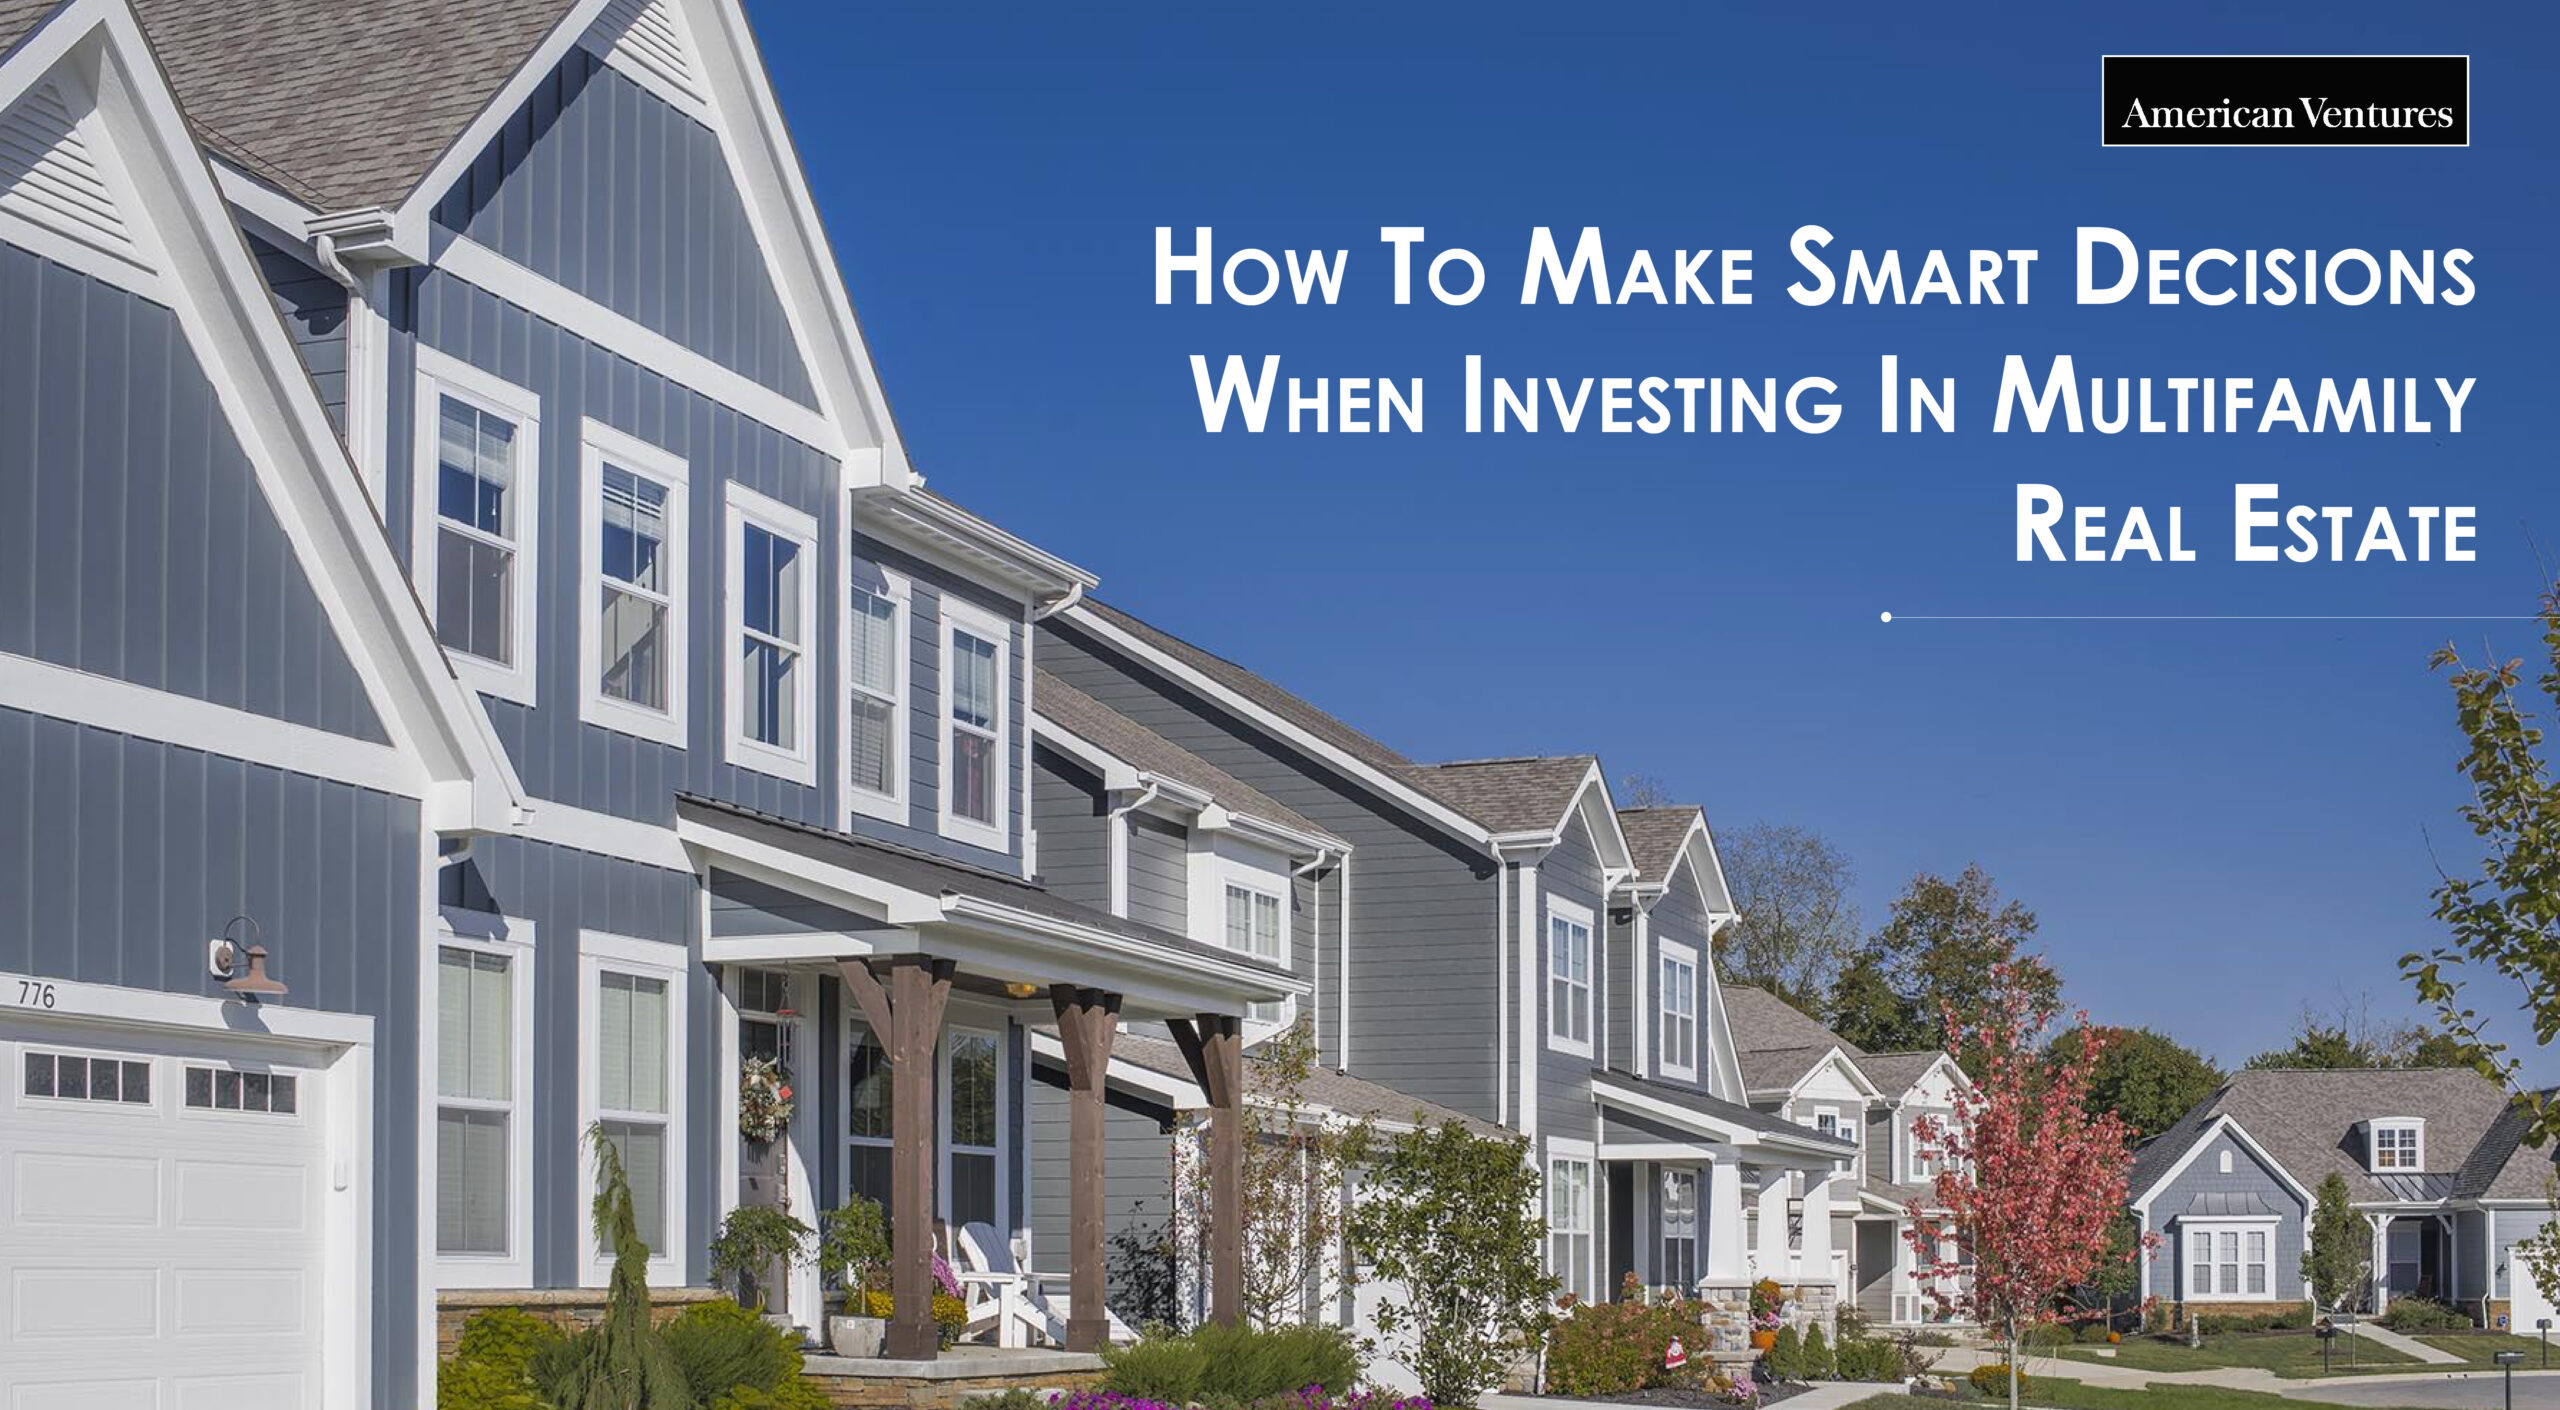 How To Make Smart Decisions When Investing In Multifamily Real Estate